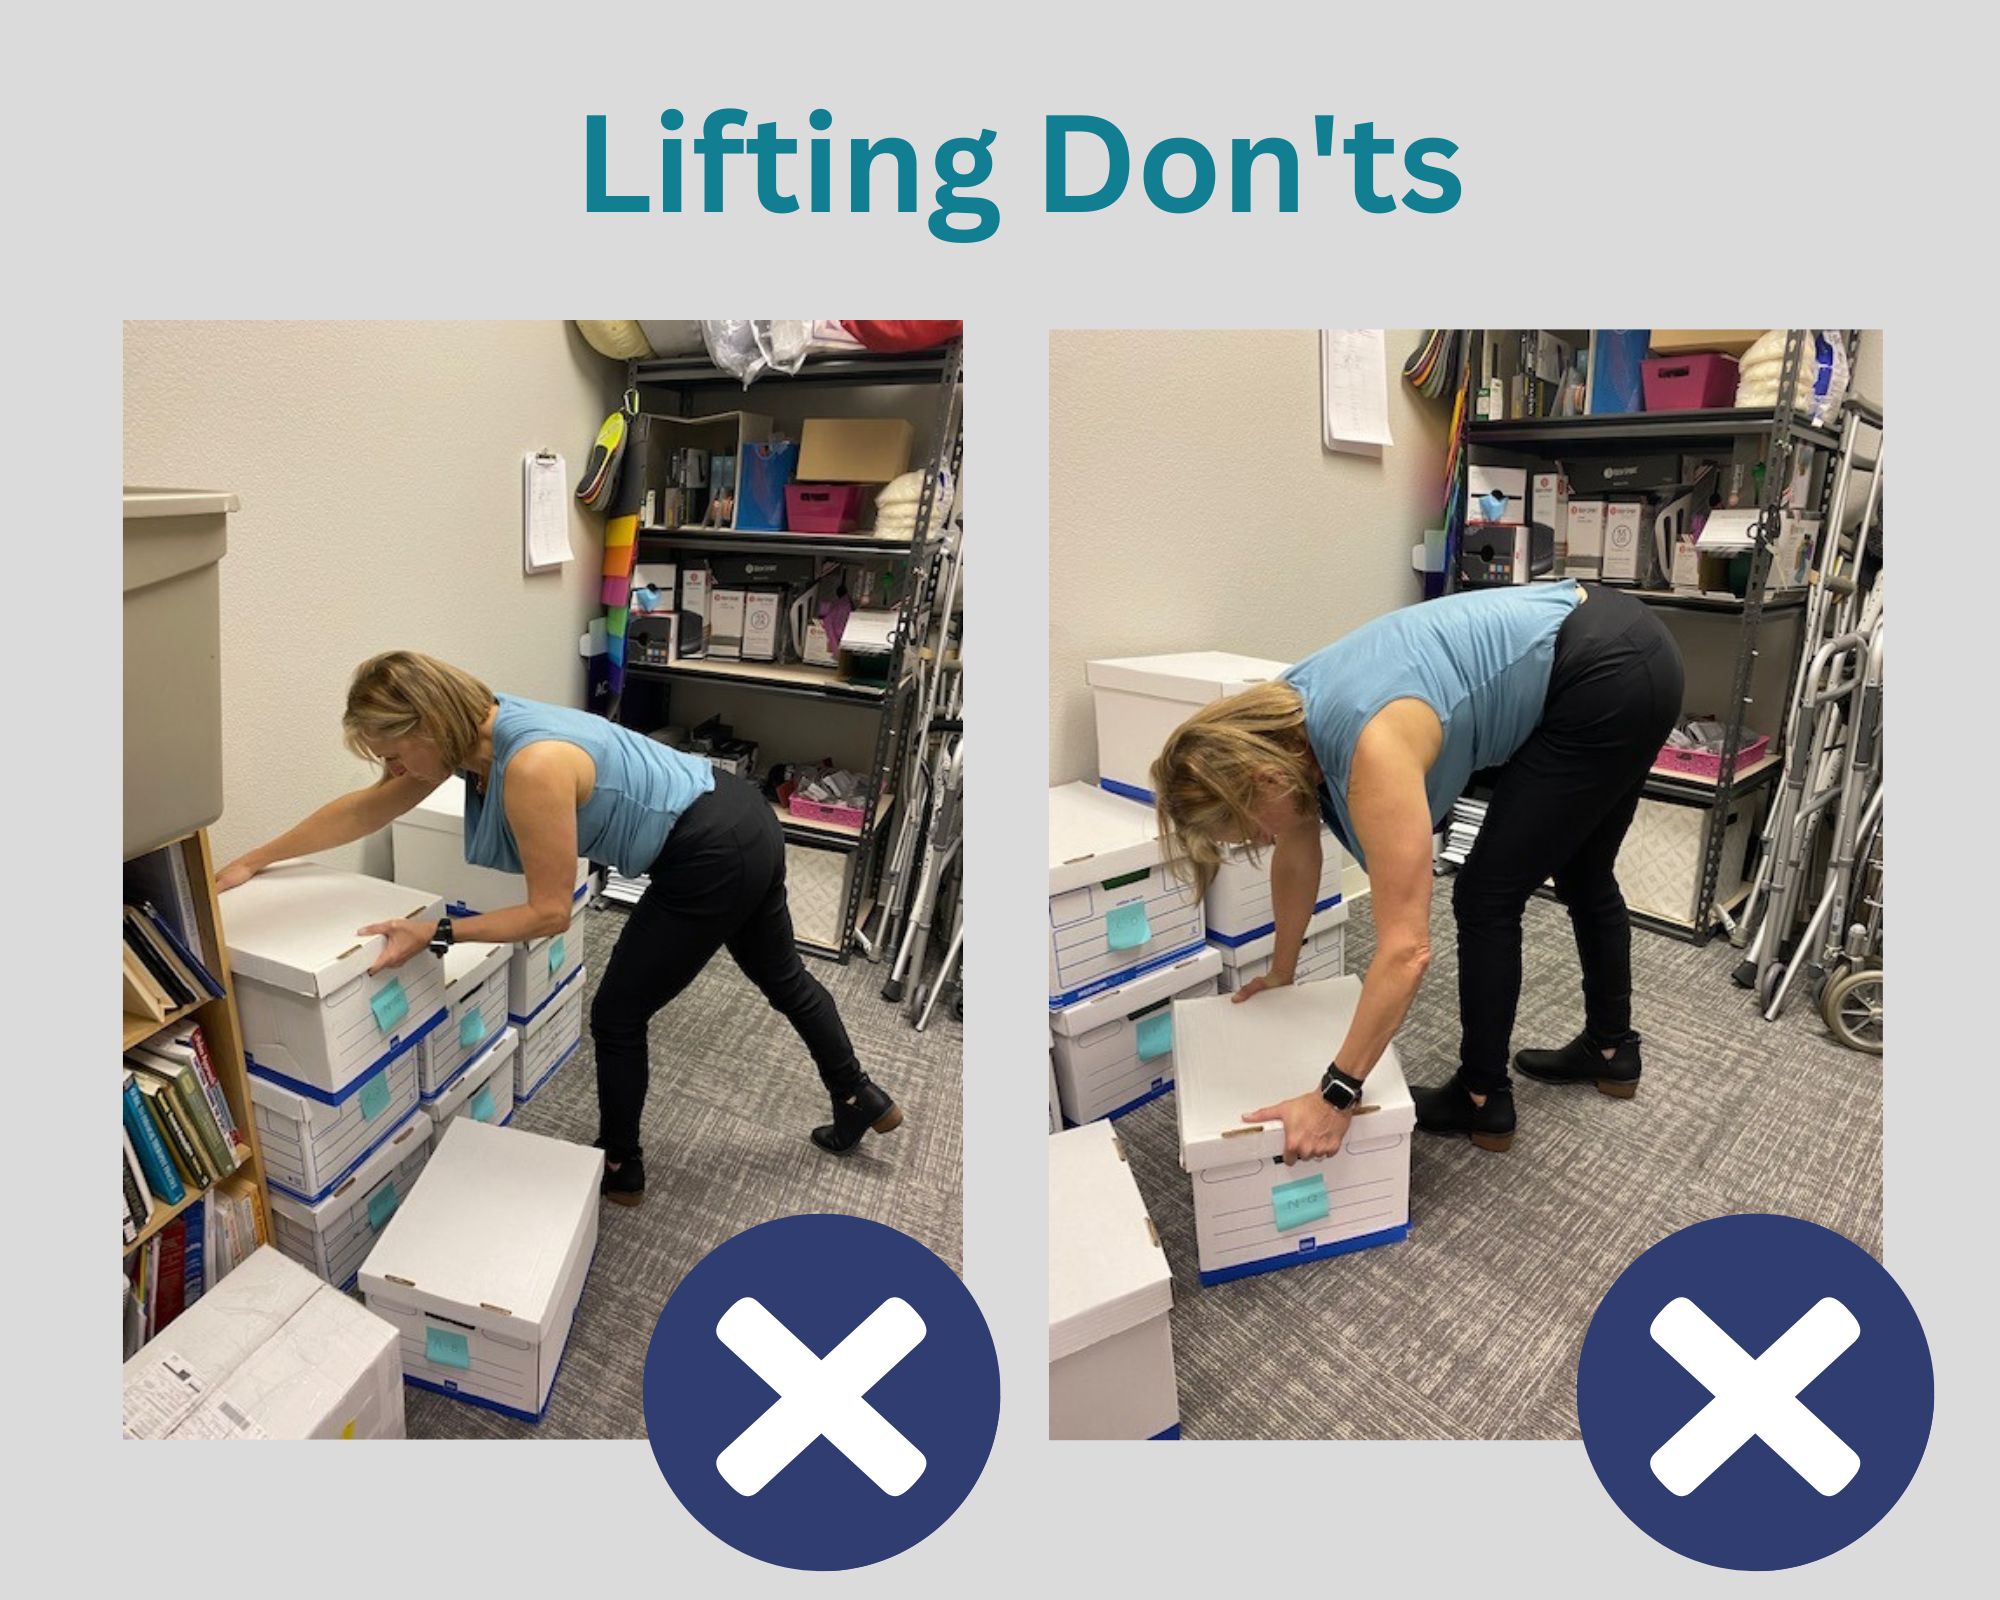 Lifting from the ground don'ts